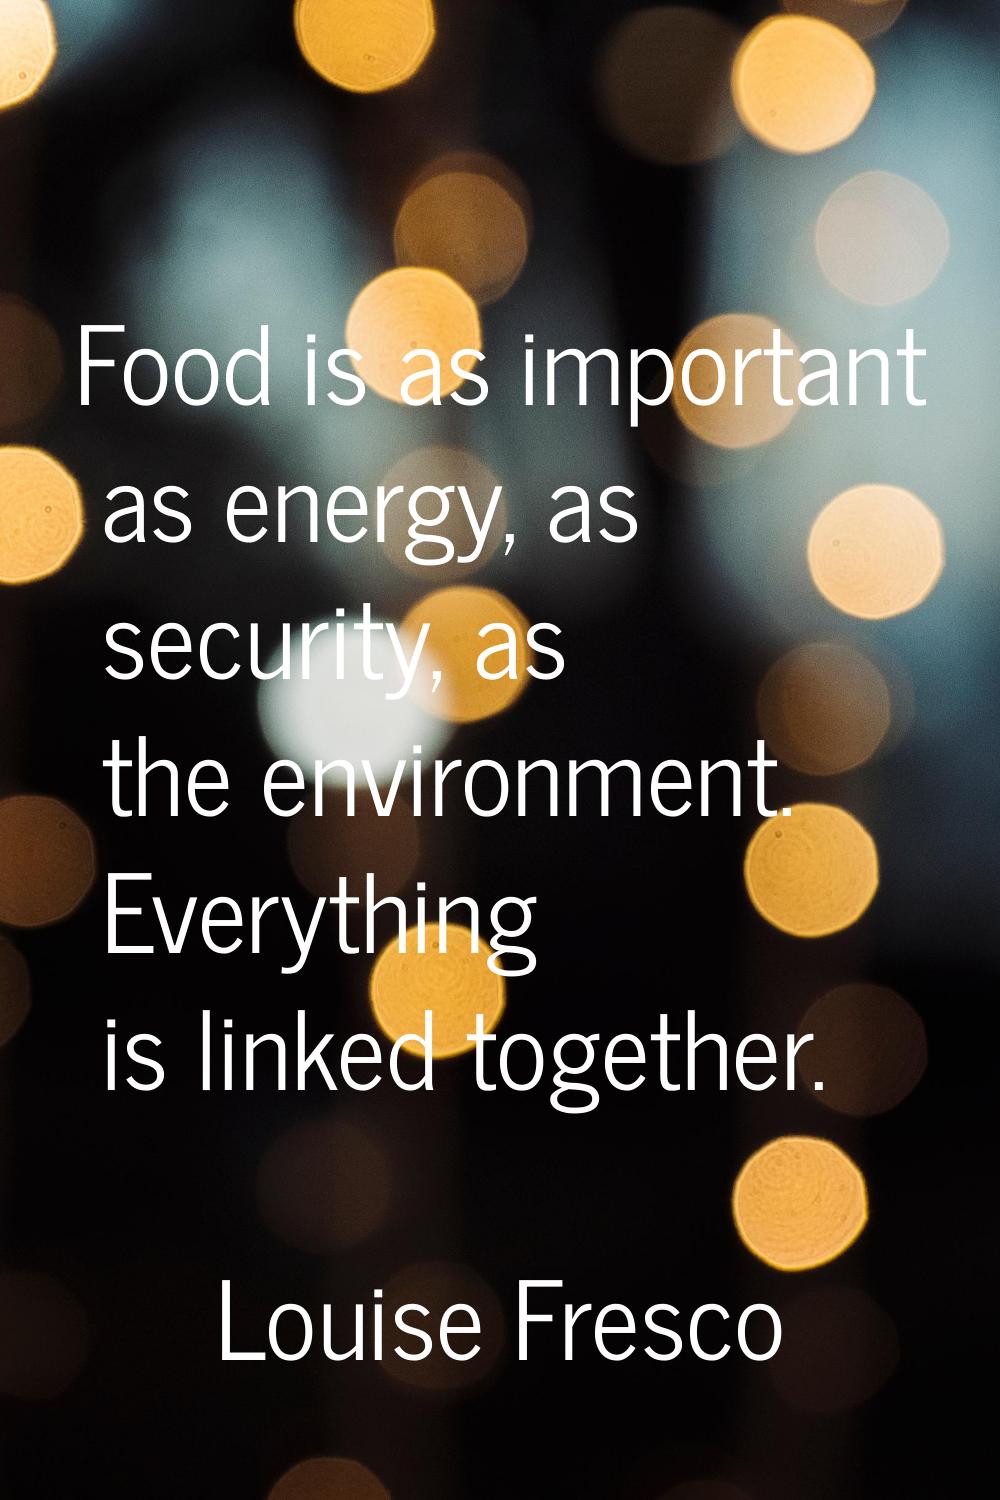 Food is as important as energy, as security, as the environment. Everything is linked together.